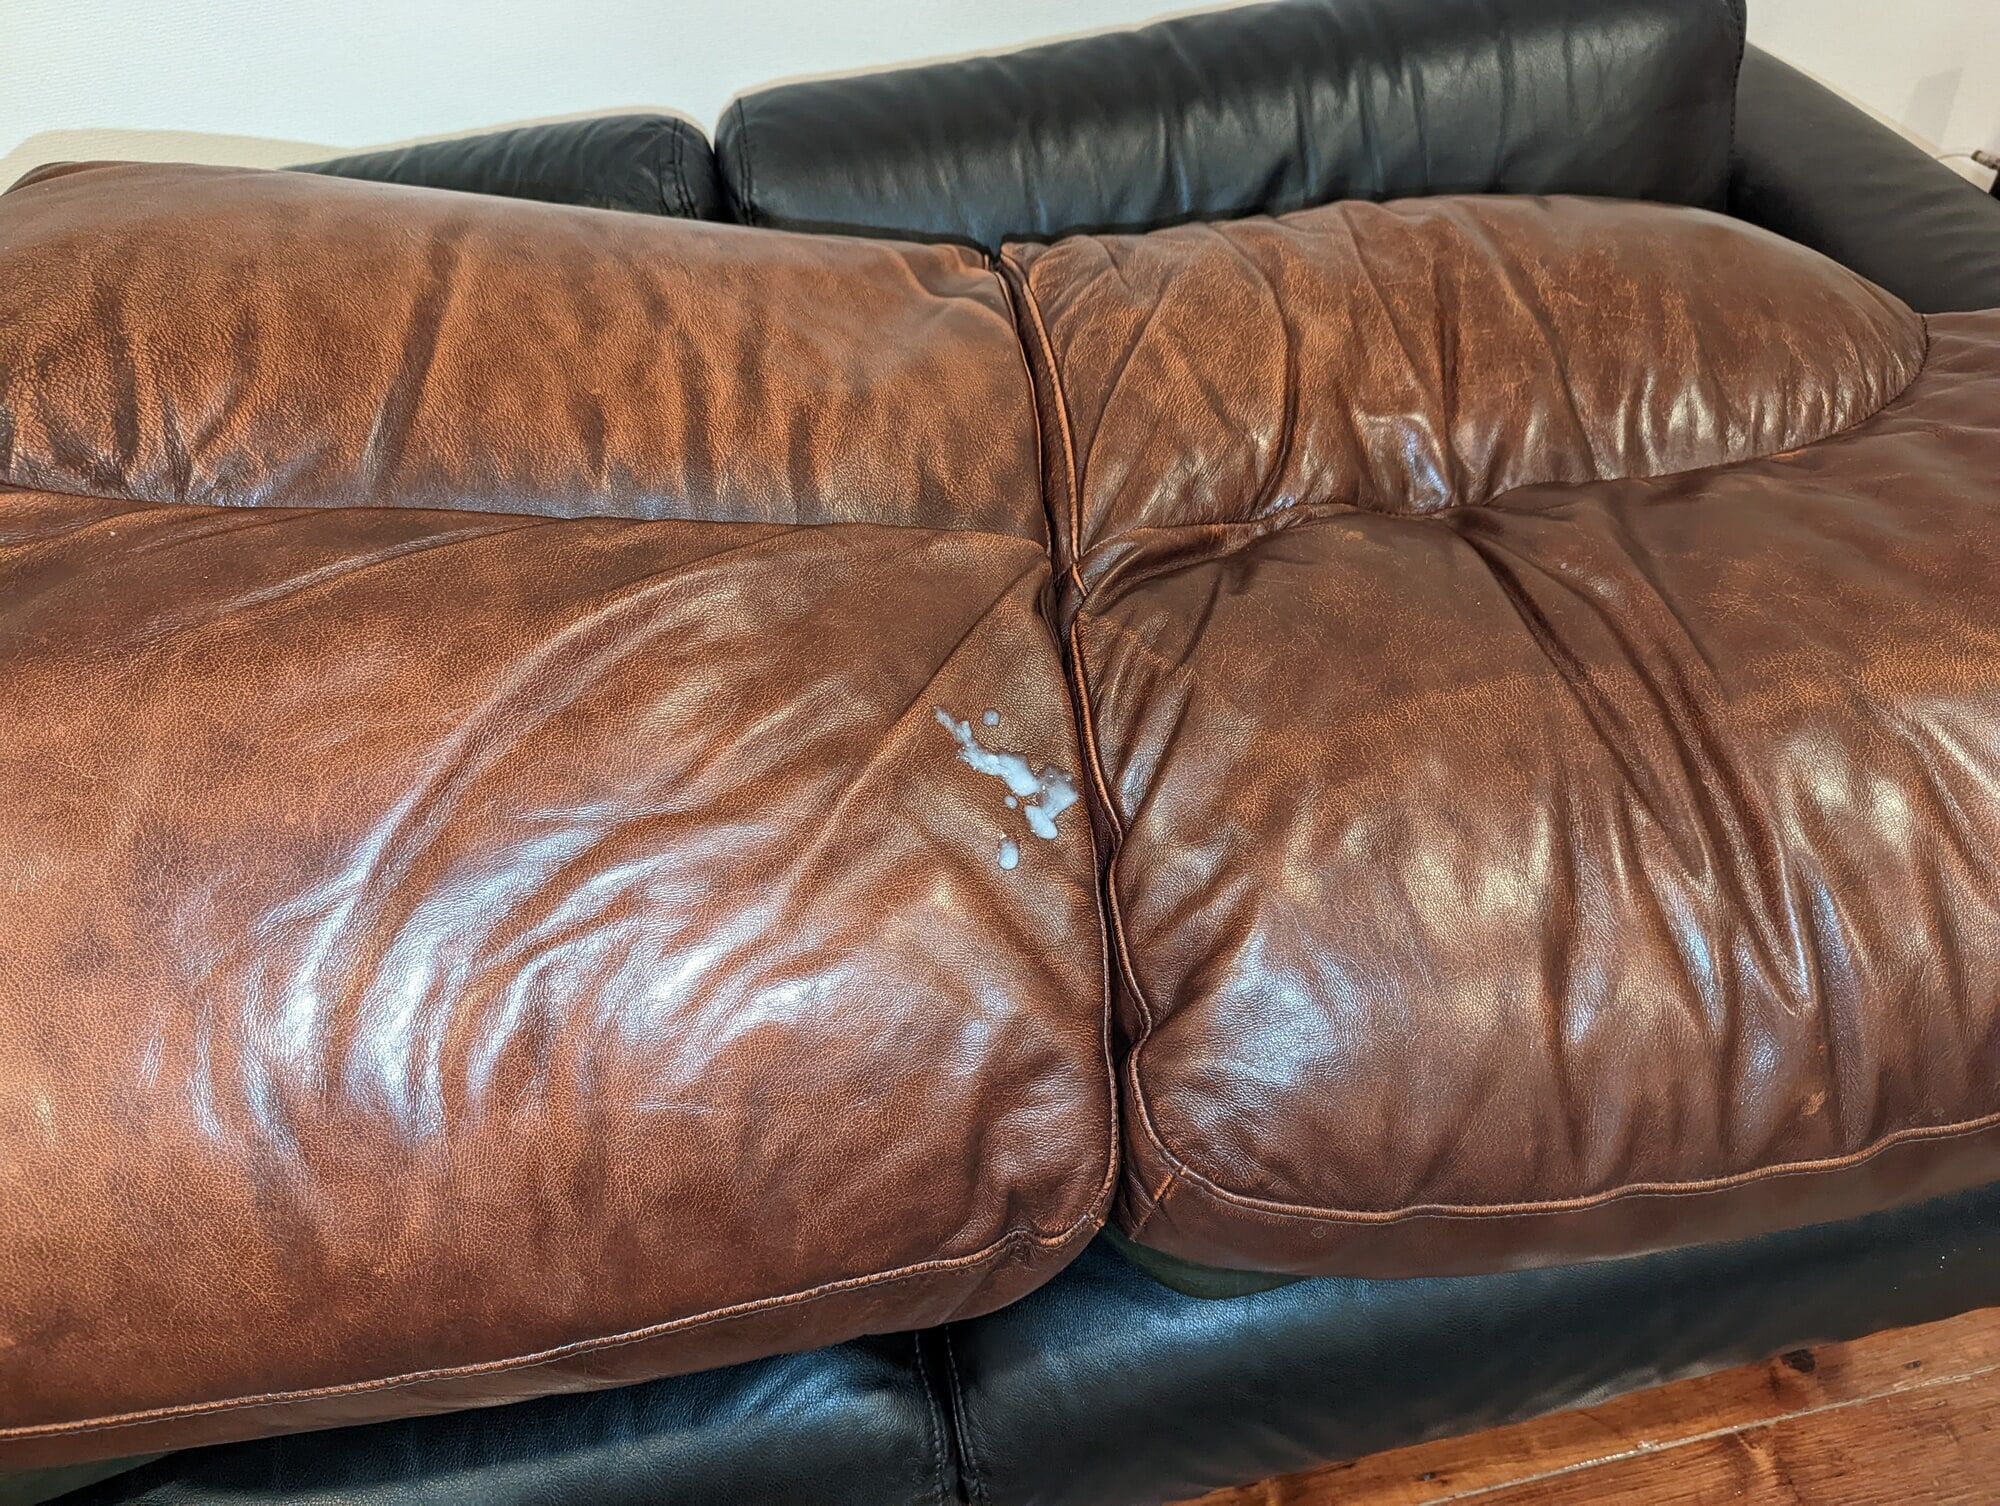 Cum on my leather pillow